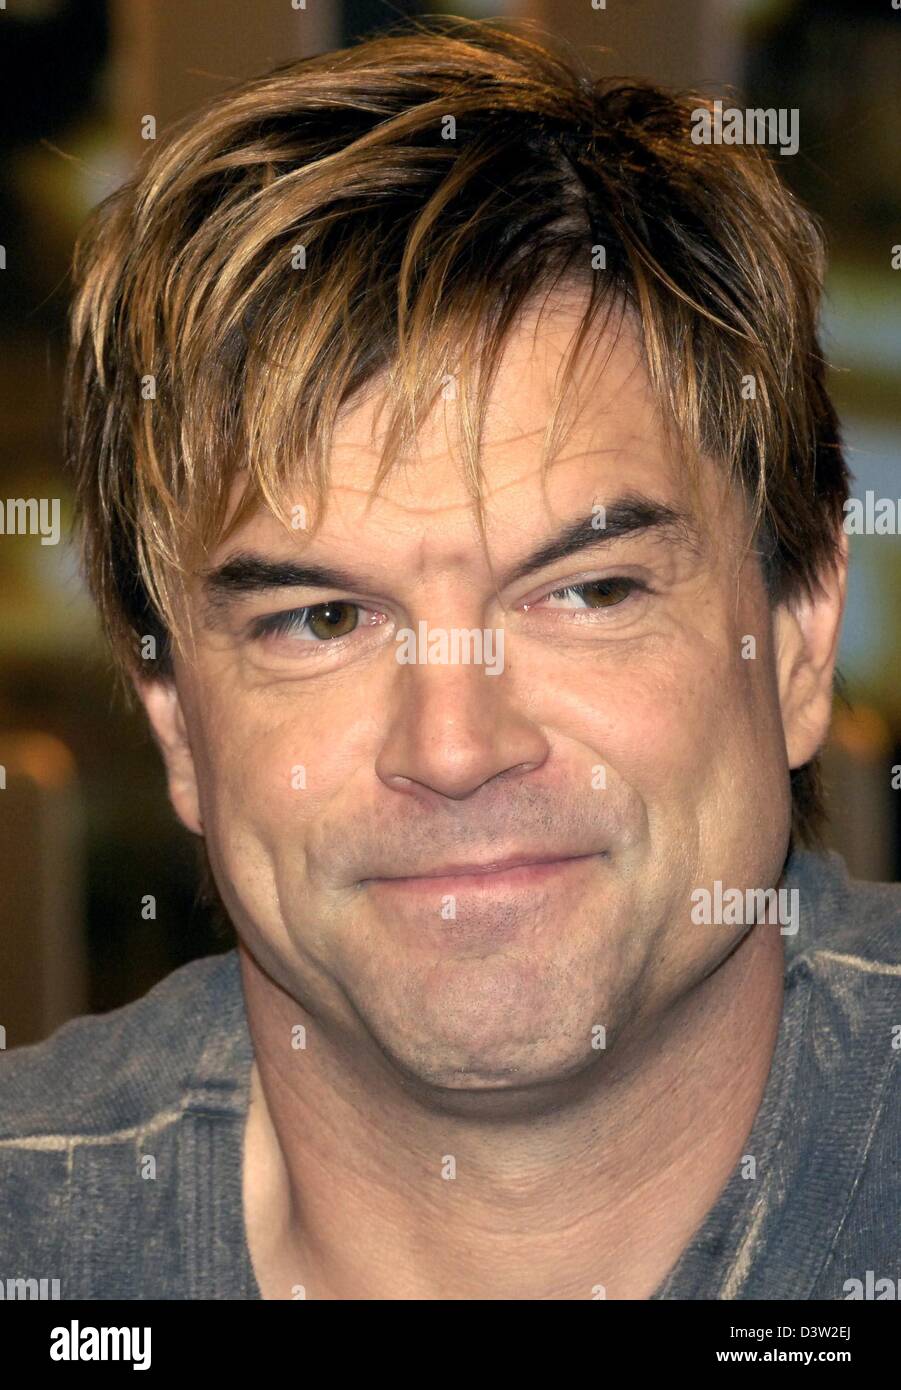 Campino, singer of German punkrock band 'Die Toten Hosen' pictured in Berlin,  Germany, 4 September 2006. 44-year-old Campino and his partner Karina  Krawczyk broke up already four months ago, as his record